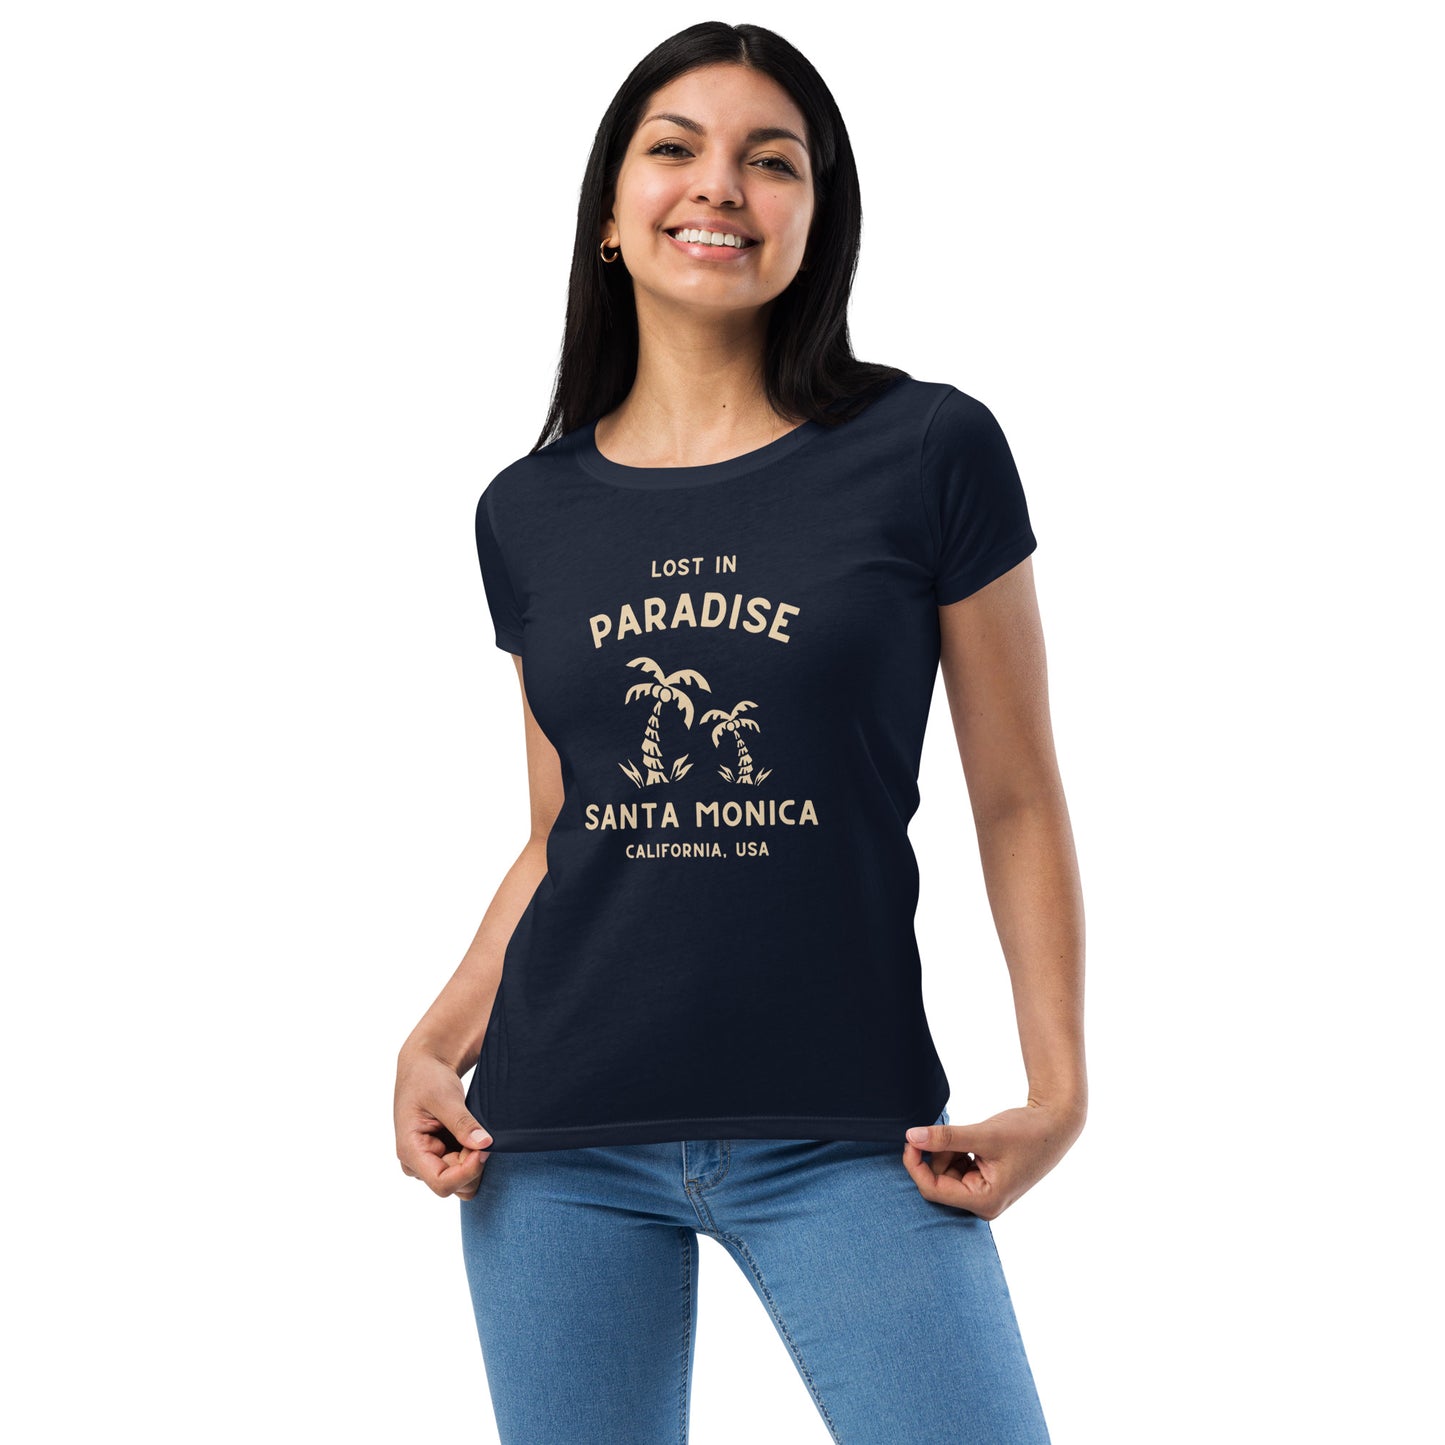 Lost In Paradise Women’s Fitted T-Shirt